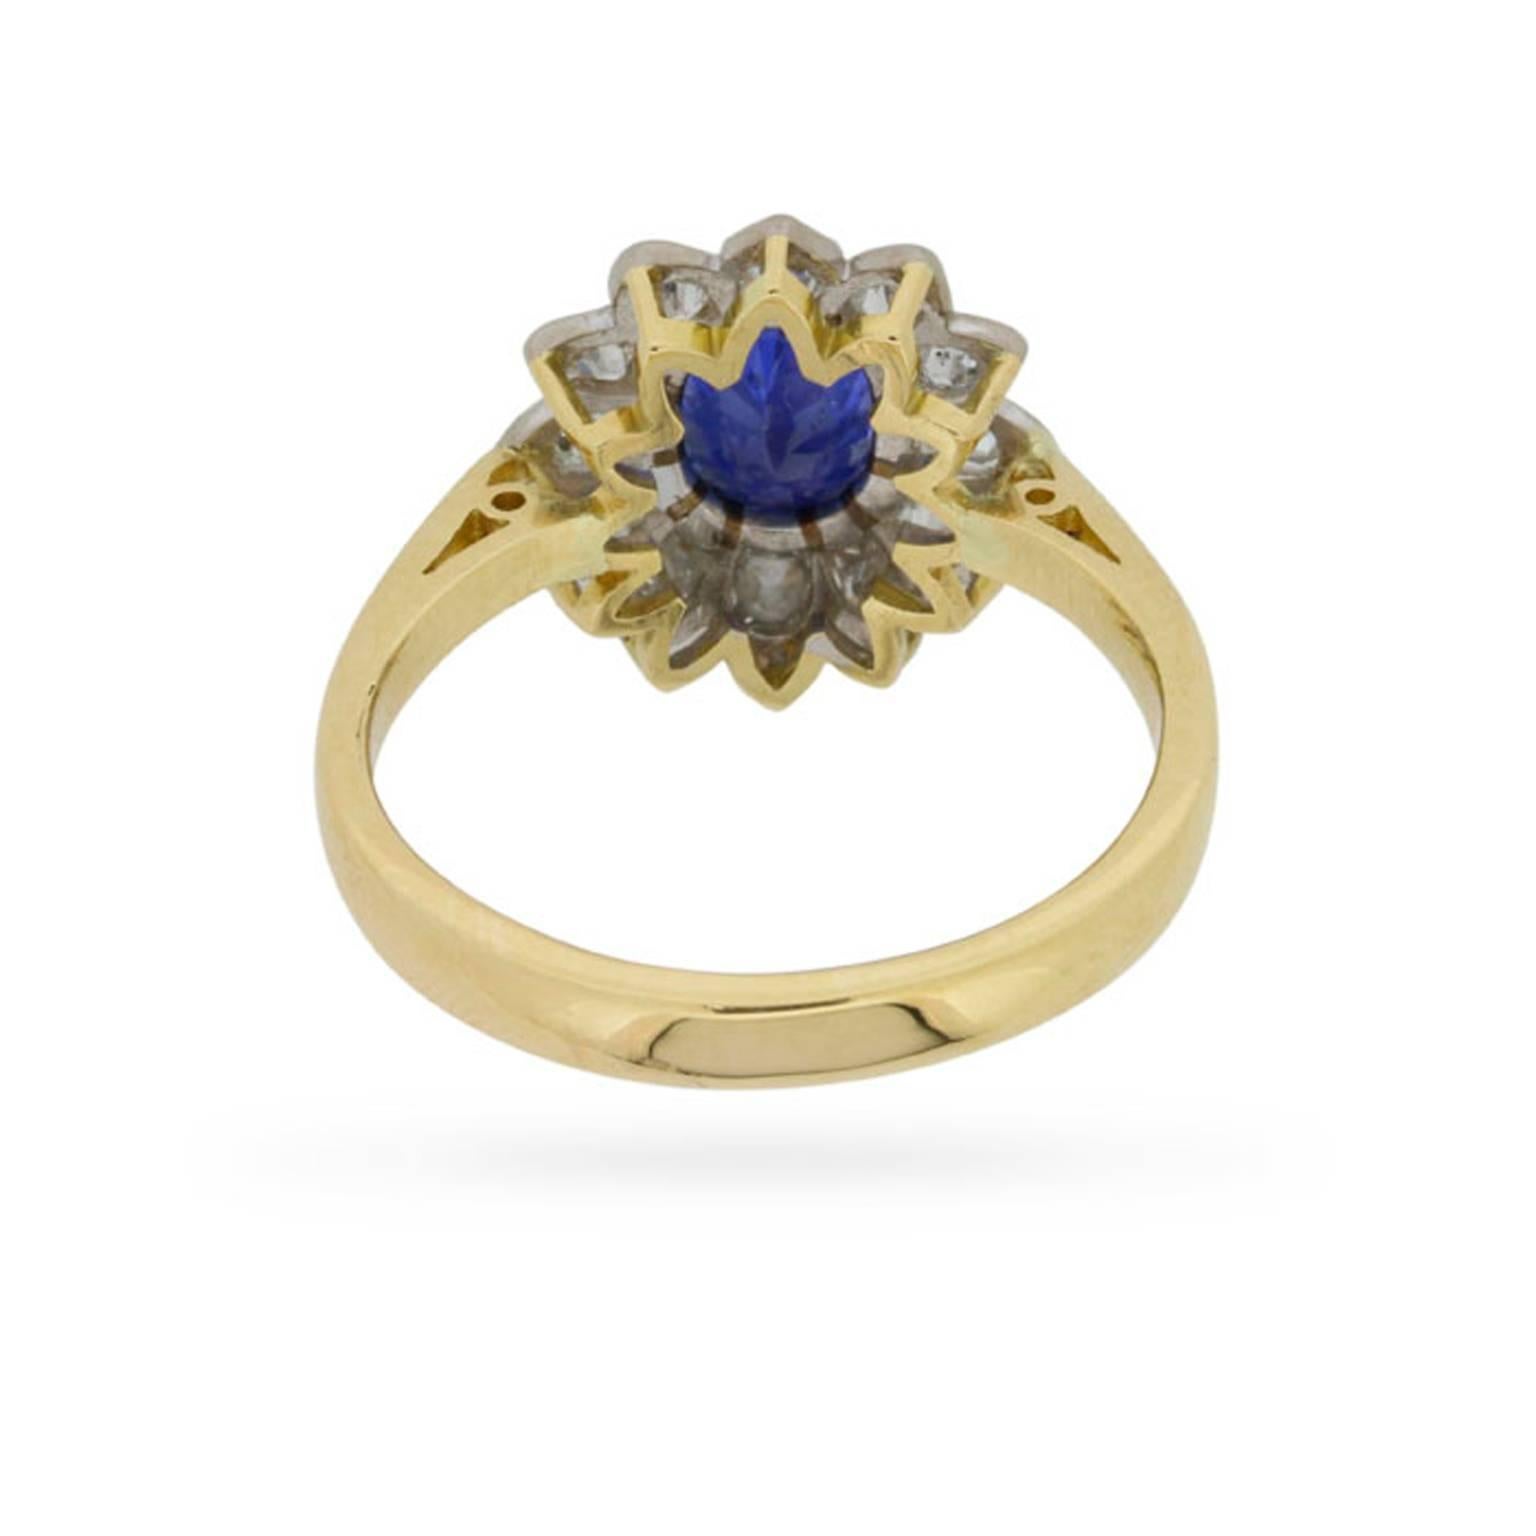 Women's or Men's Vintage Sapphire and Diamond Flower Cluster Ring, circa 1940s